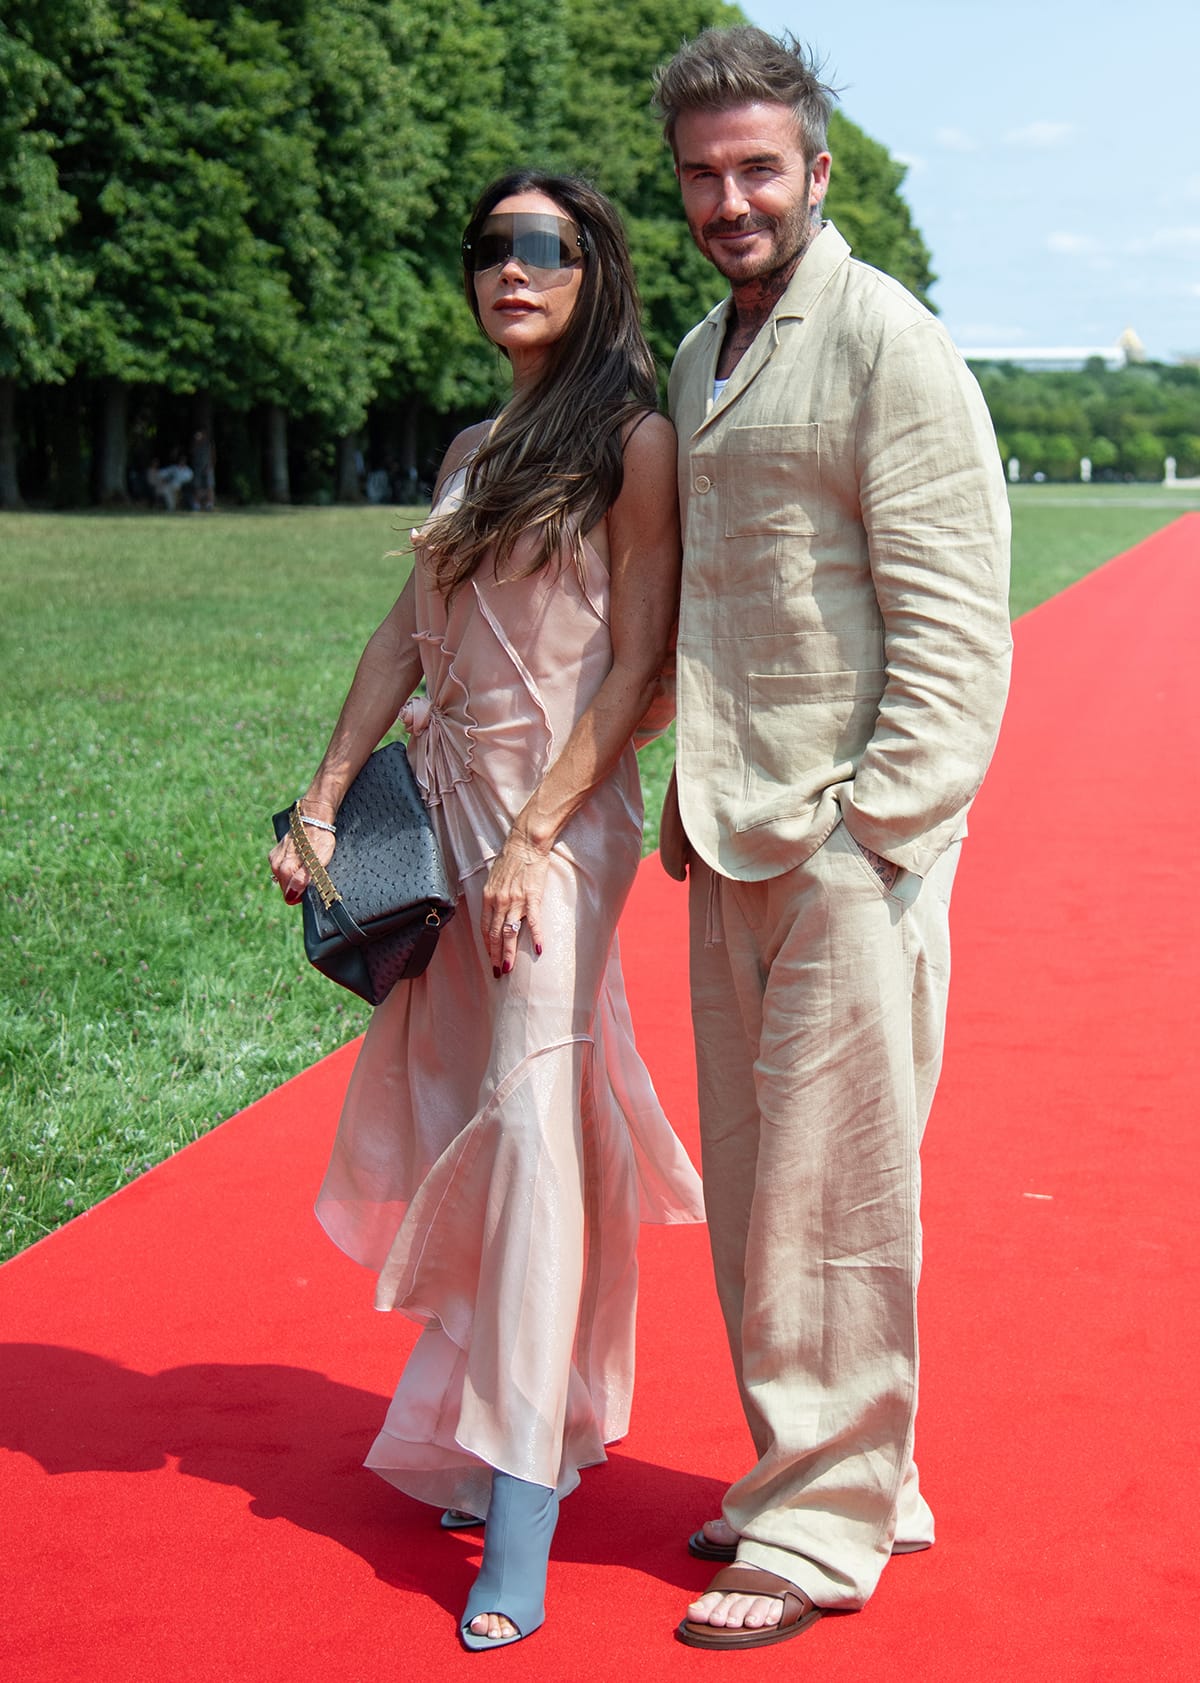 Victoria Beckham and David Beckham pose on the red carpet in matching neutrals, with the athlete in a beige suit and brown sandals and the pop star in a pink slip dress and thigh-high boots